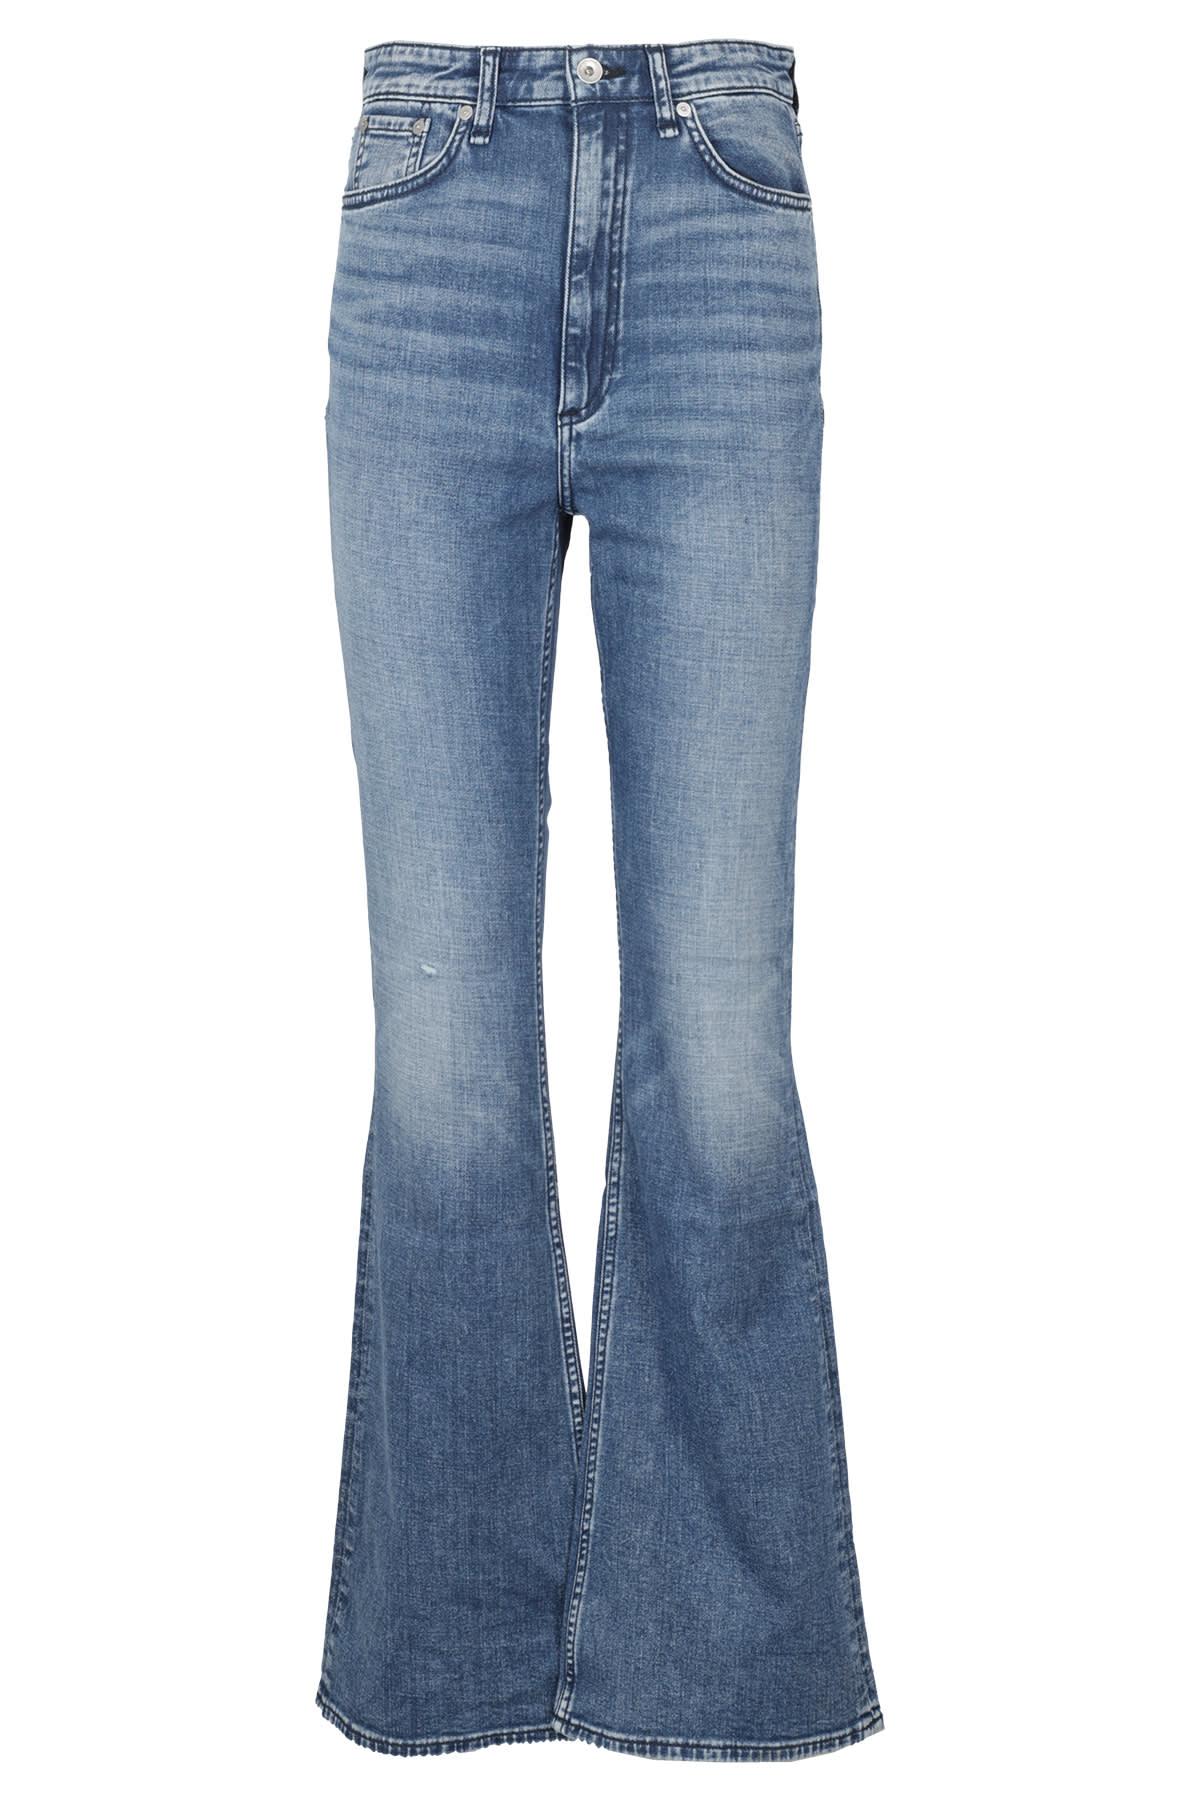 Rag & Bone Denim casey High Rise Cropped Flared Jeans in Black Womens Clothing Jeans Flare and bell bottom jeans 